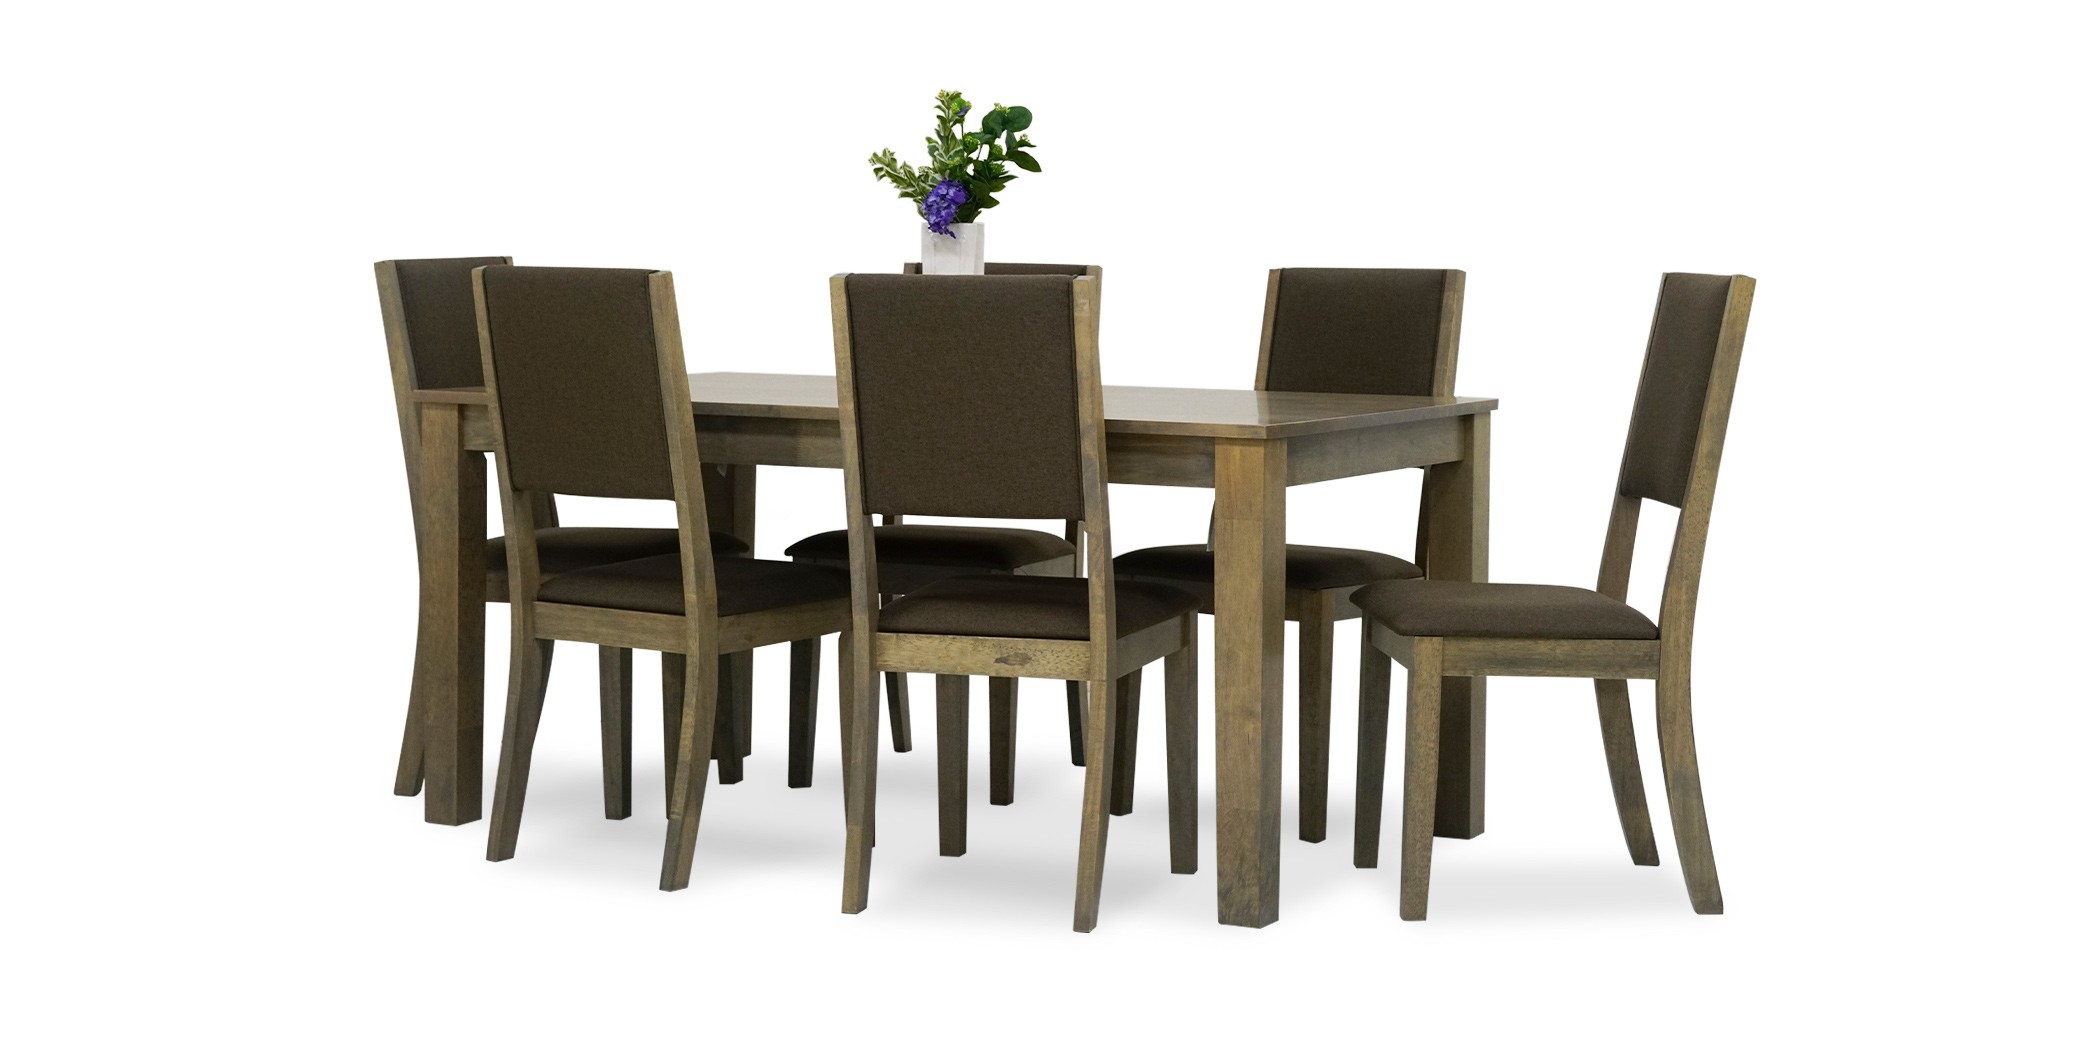 Silver Table and 6 Chairs Rubberwood White Wash